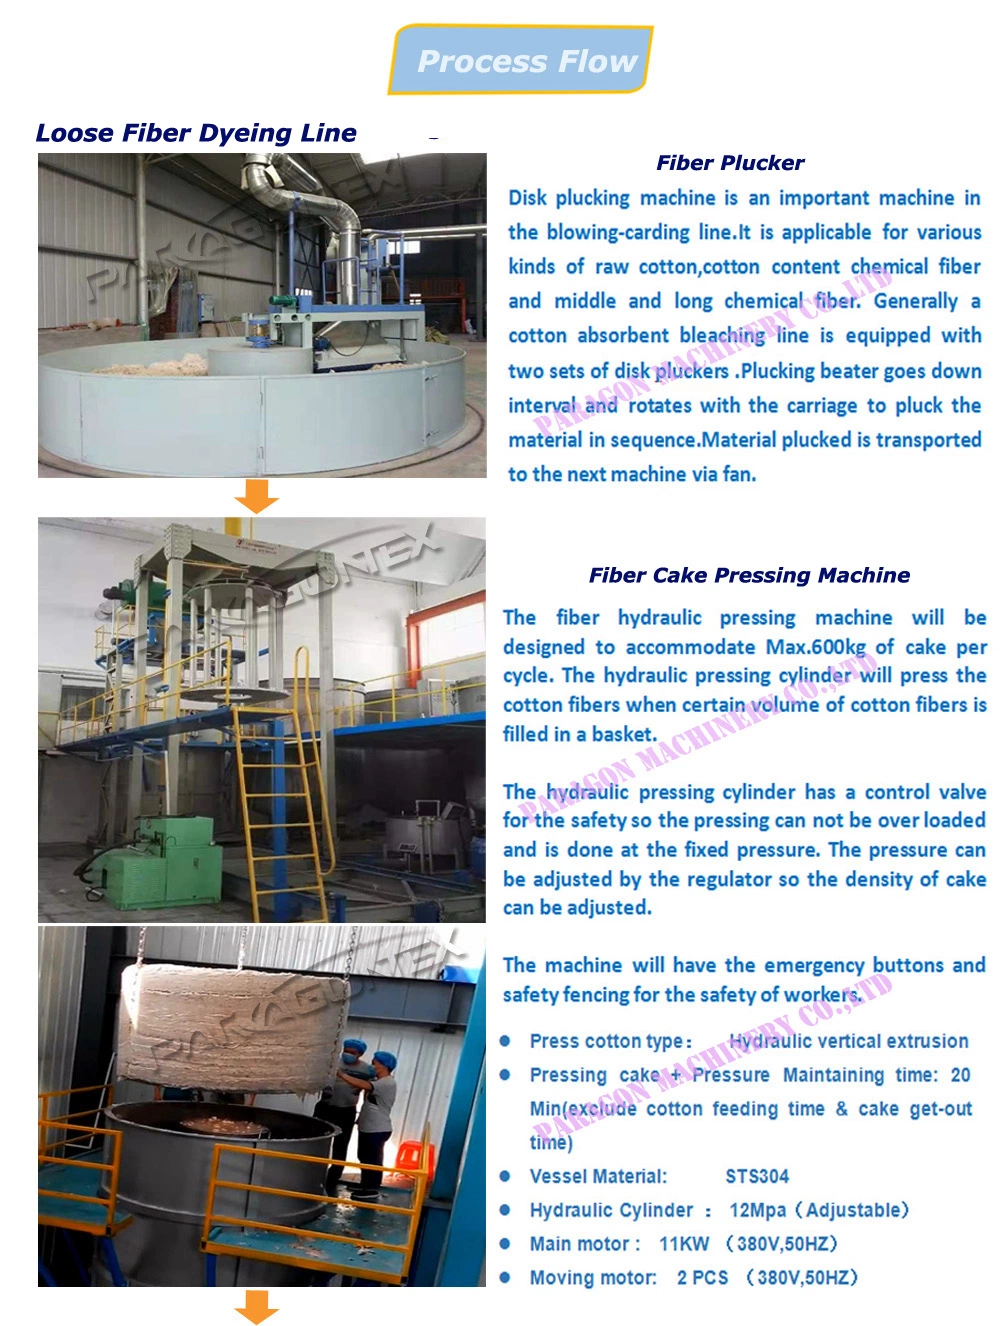 Oven Machine for Loose Fiber Dyeing Line/Textile Machine